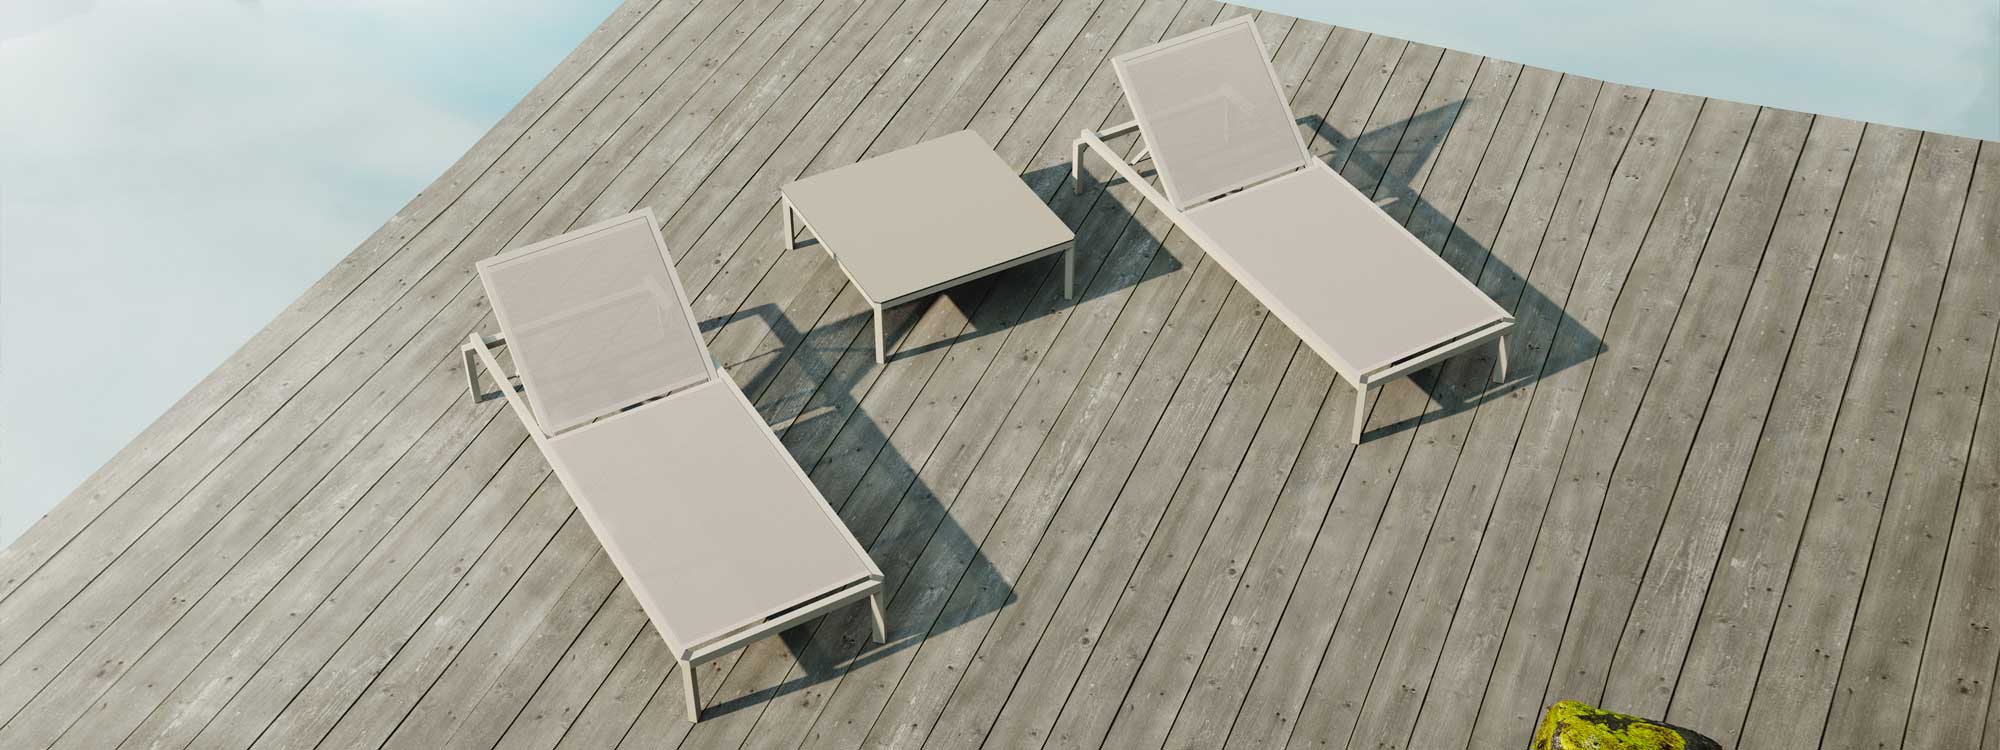 Image of aerial view of pair of Oiside 45 minimalist sun loungers and a low table in between, shown on wooden decking in the sun